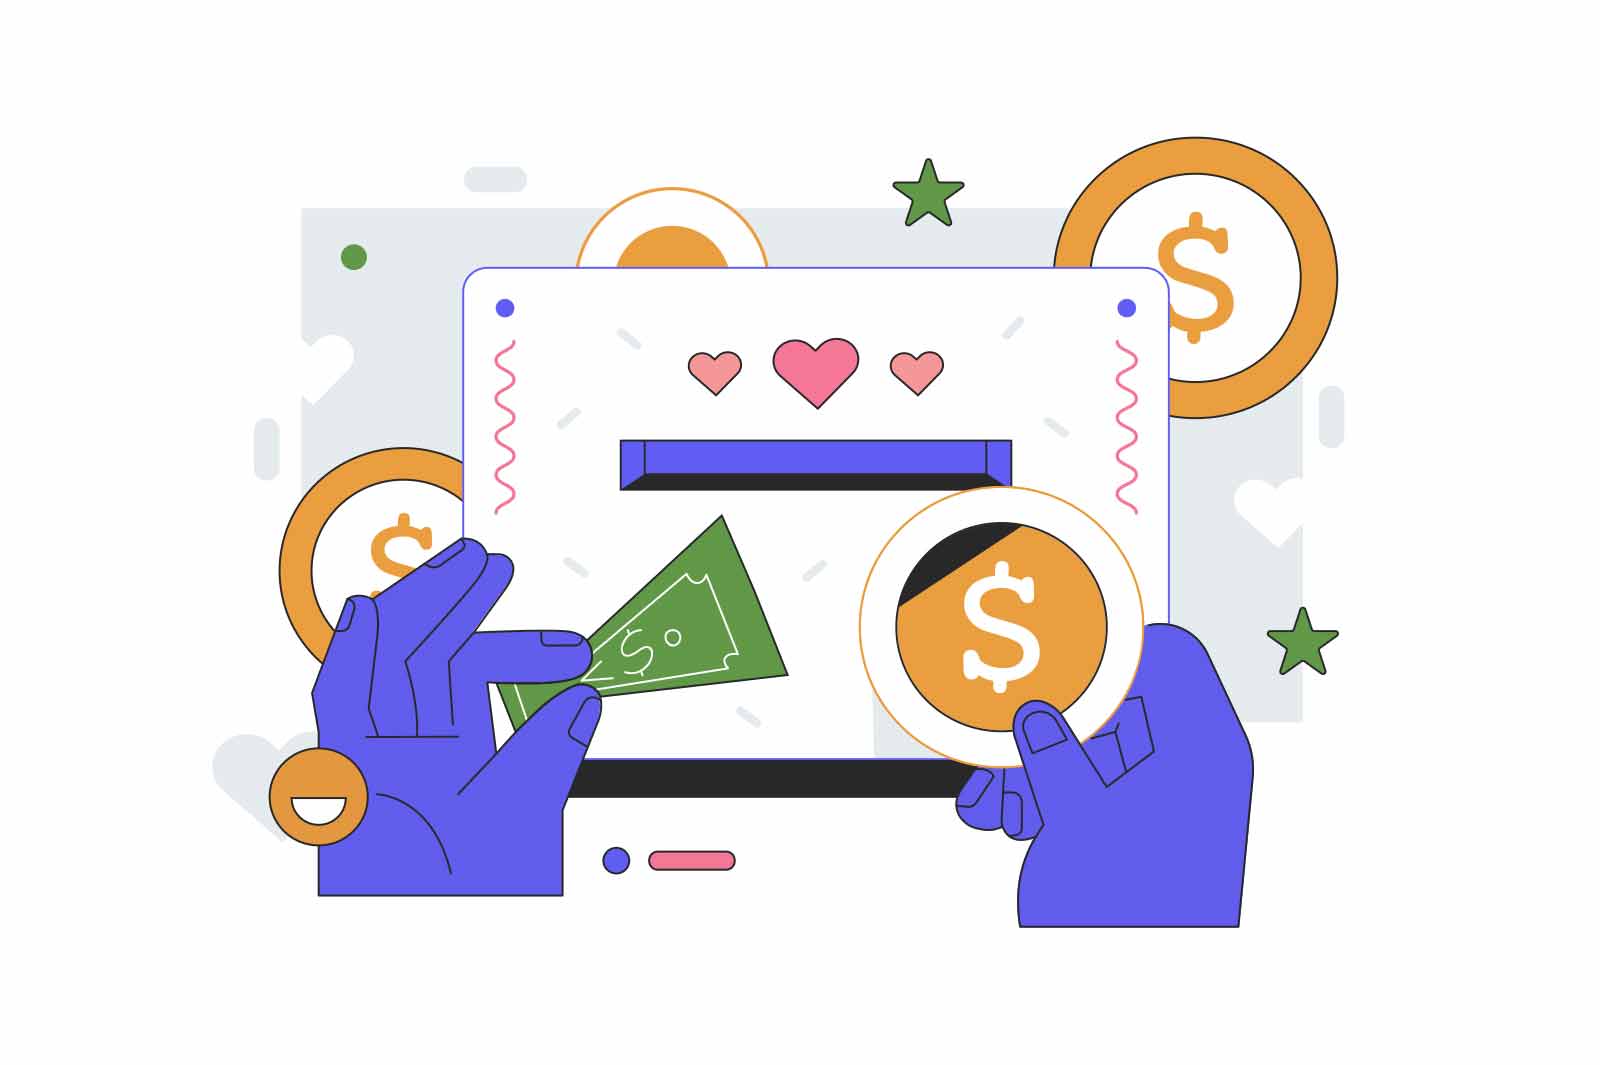 Person hands donating money in box vector illustration. Volunteers putting coins in donation box or donating money. Financial support and fundraising concept